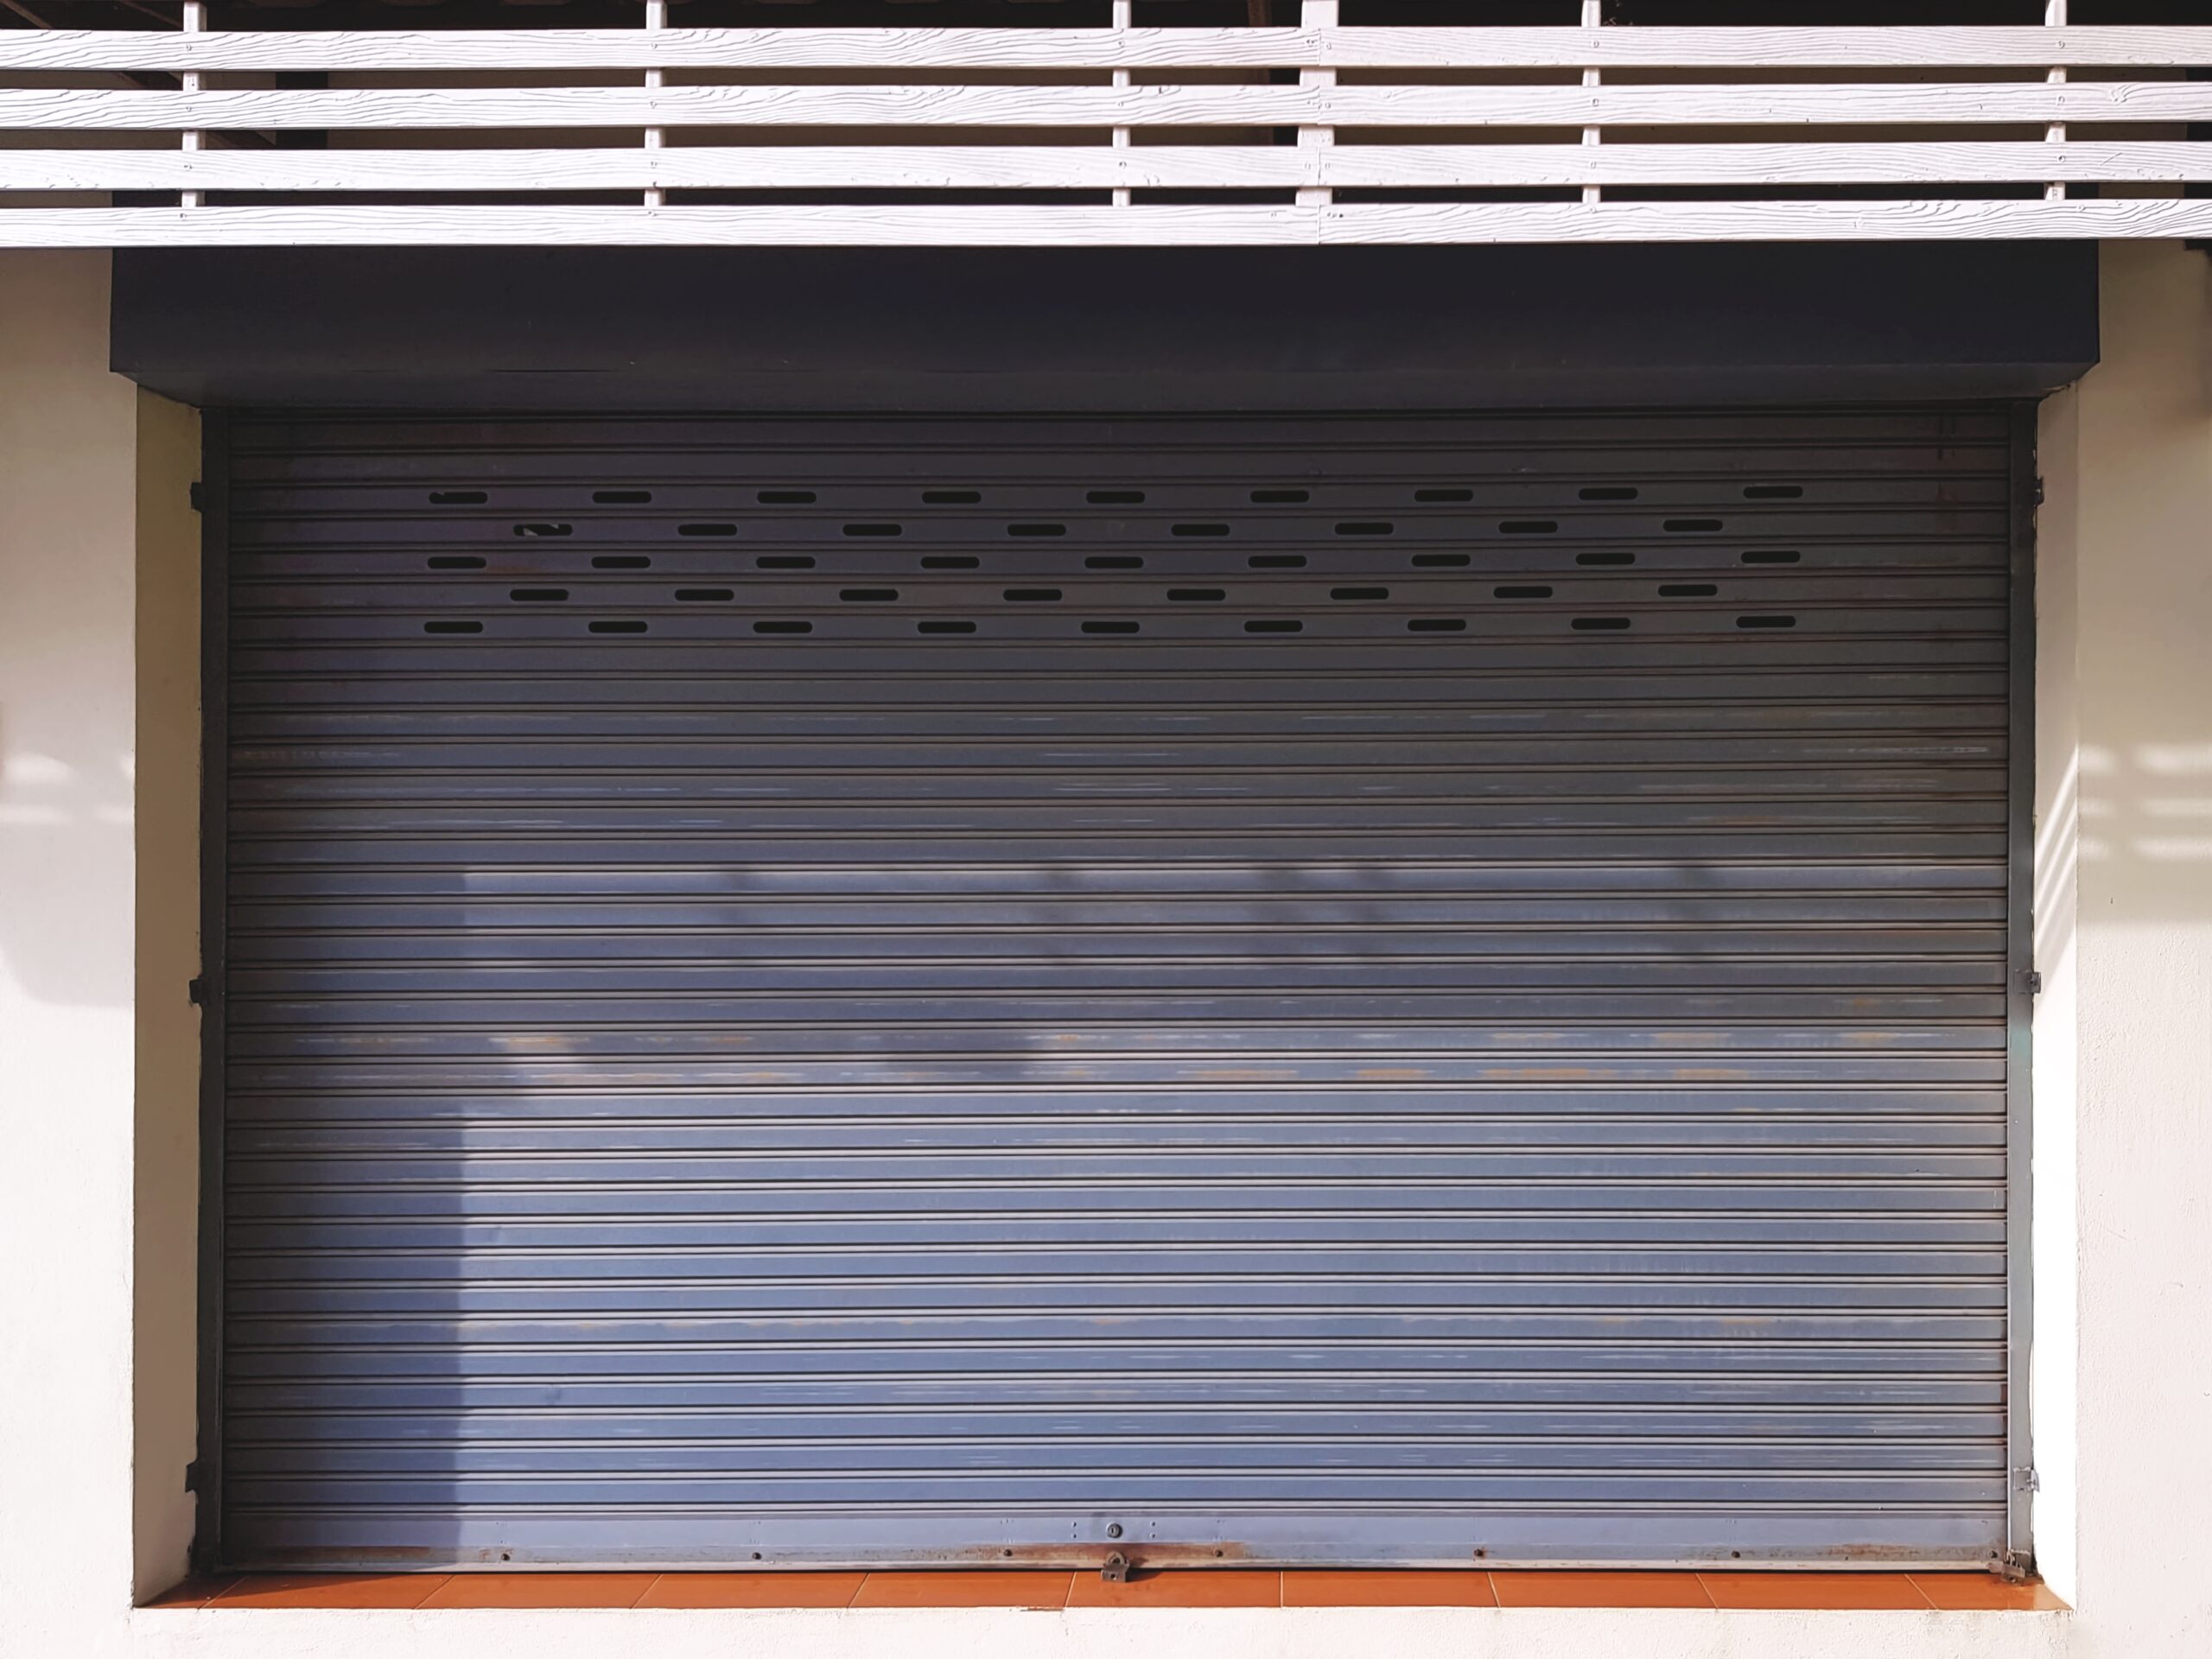 What Should You Know if Your Garage Door is Off its Tracks